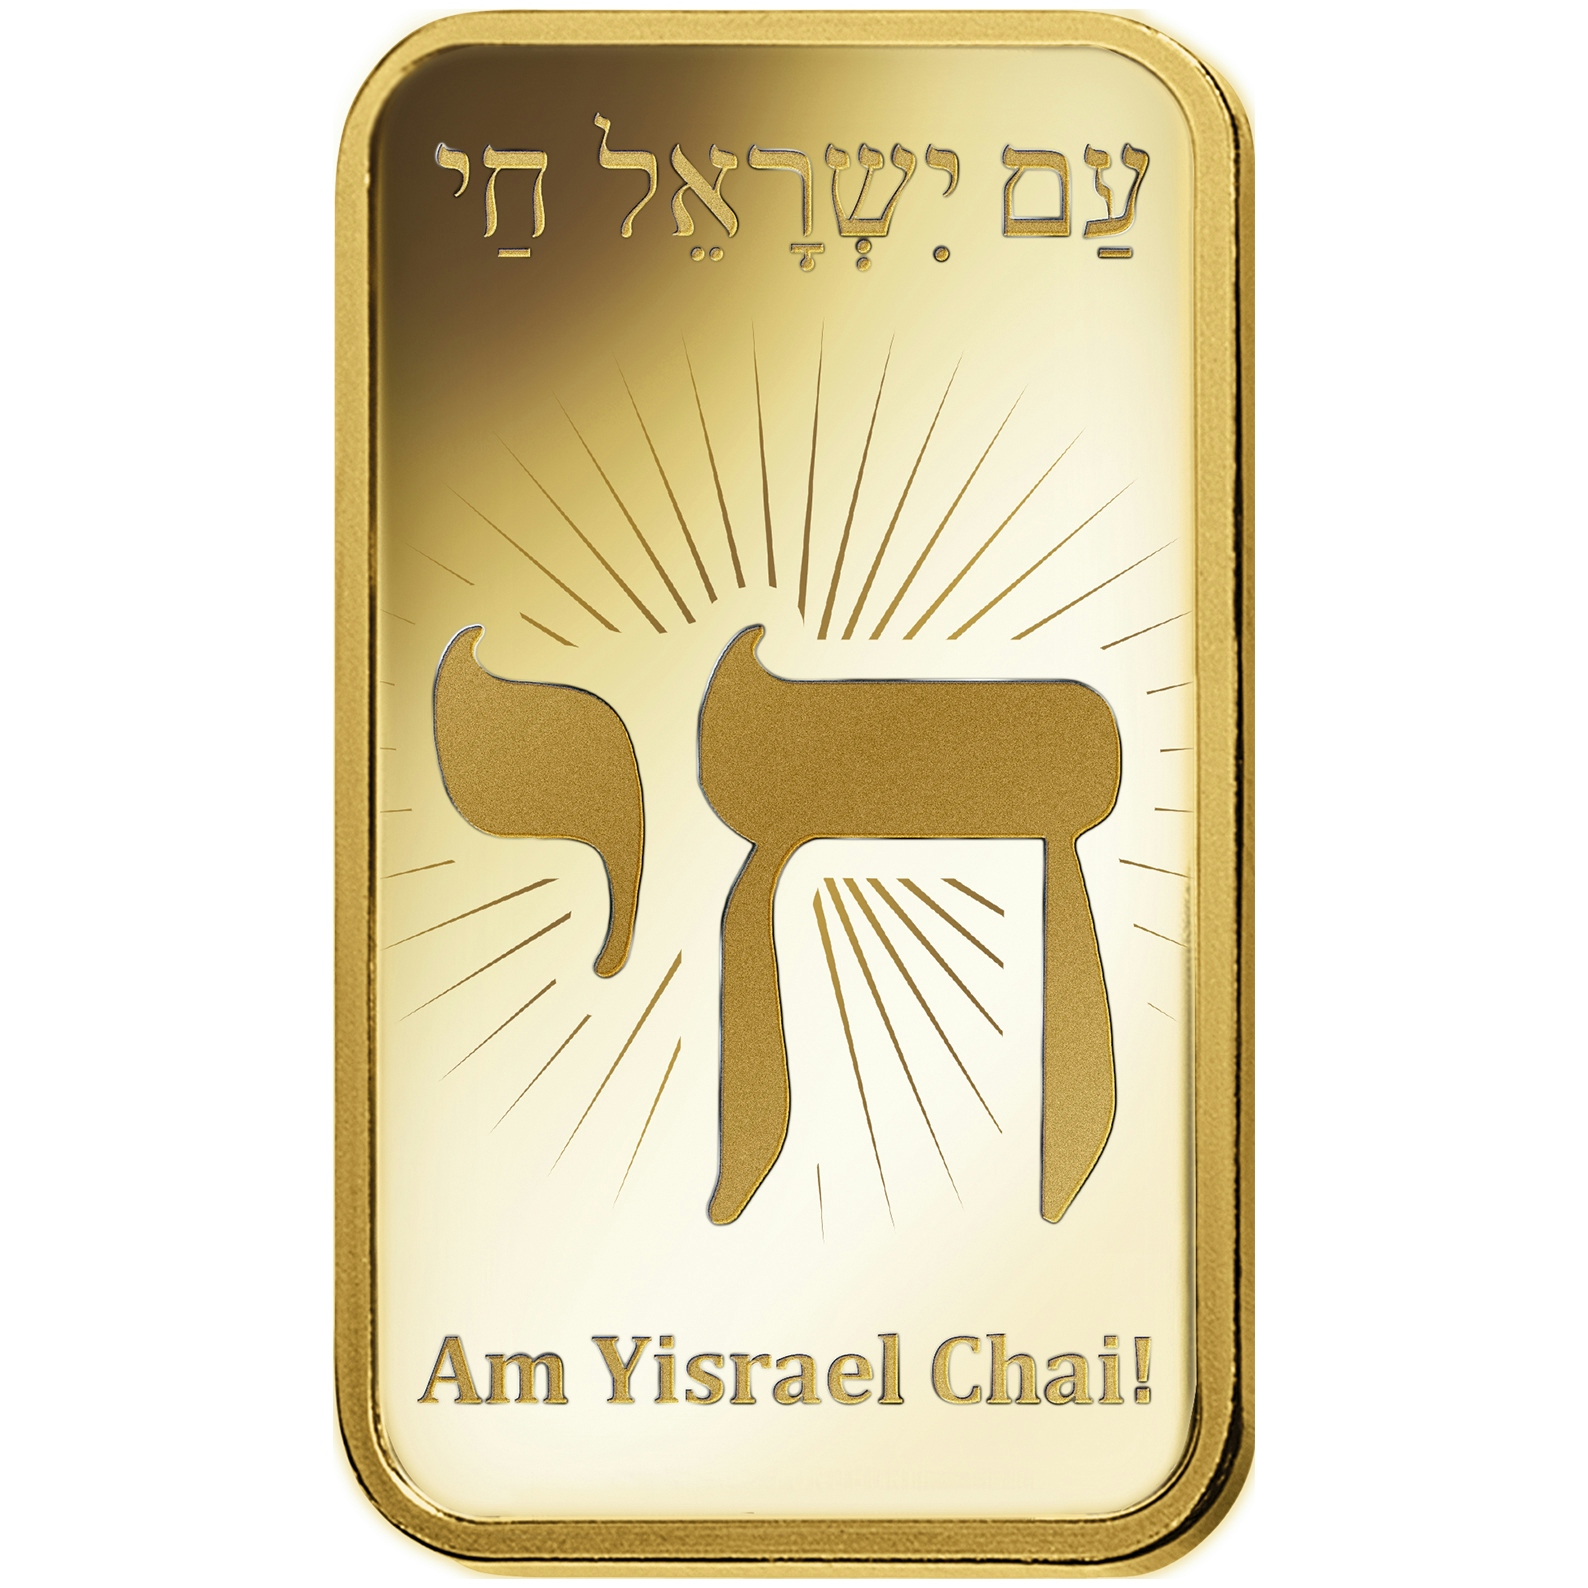 Achat d'or, 1 oz d'or pur Am Yisrael Chai - PAMP Suisse - Front 